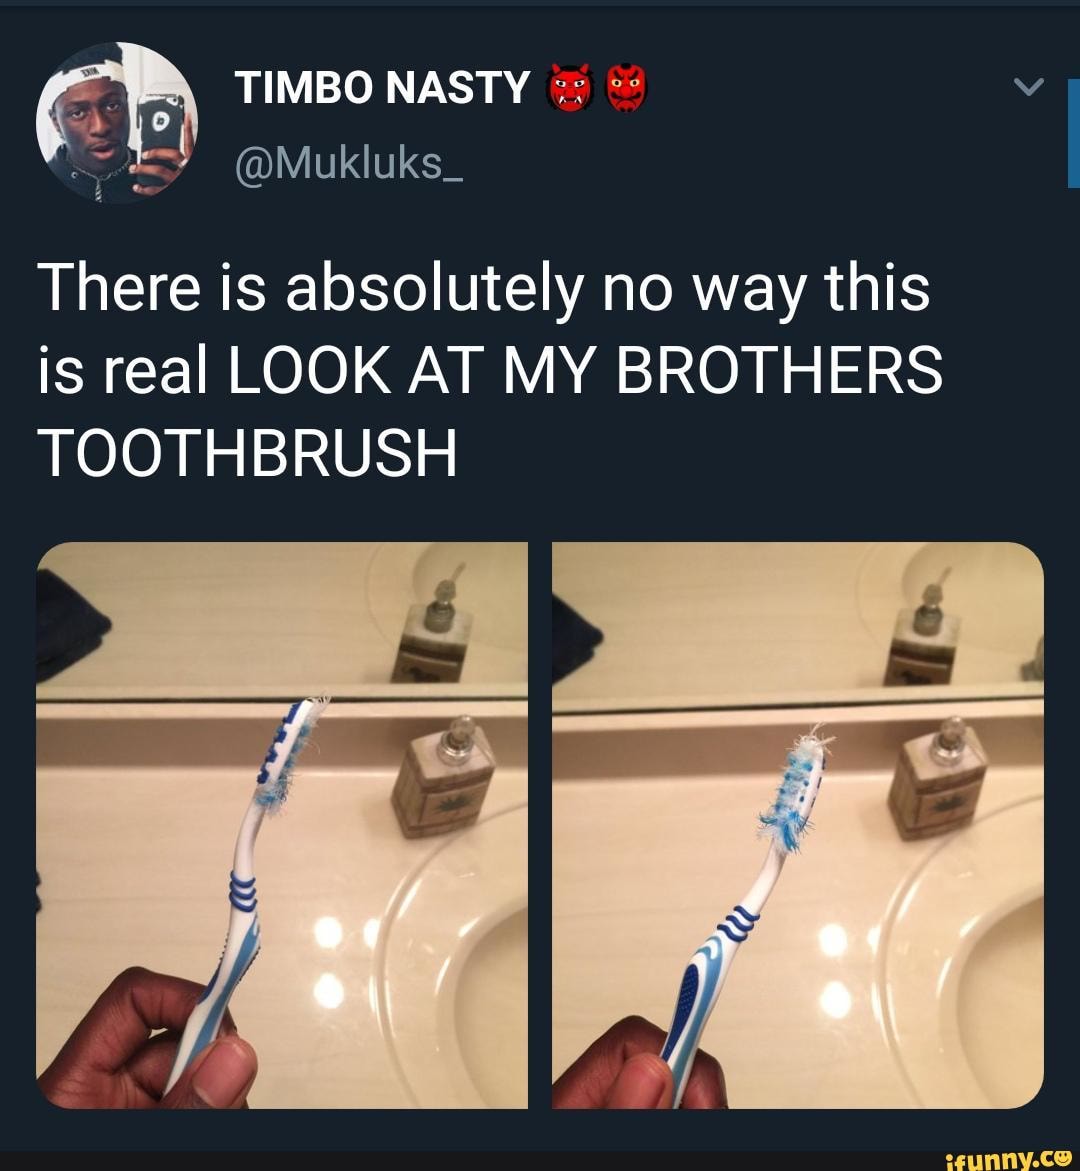 There is absolutely no way this is real LOOK AT MY BROTHERS TOOTHBRUSH ...